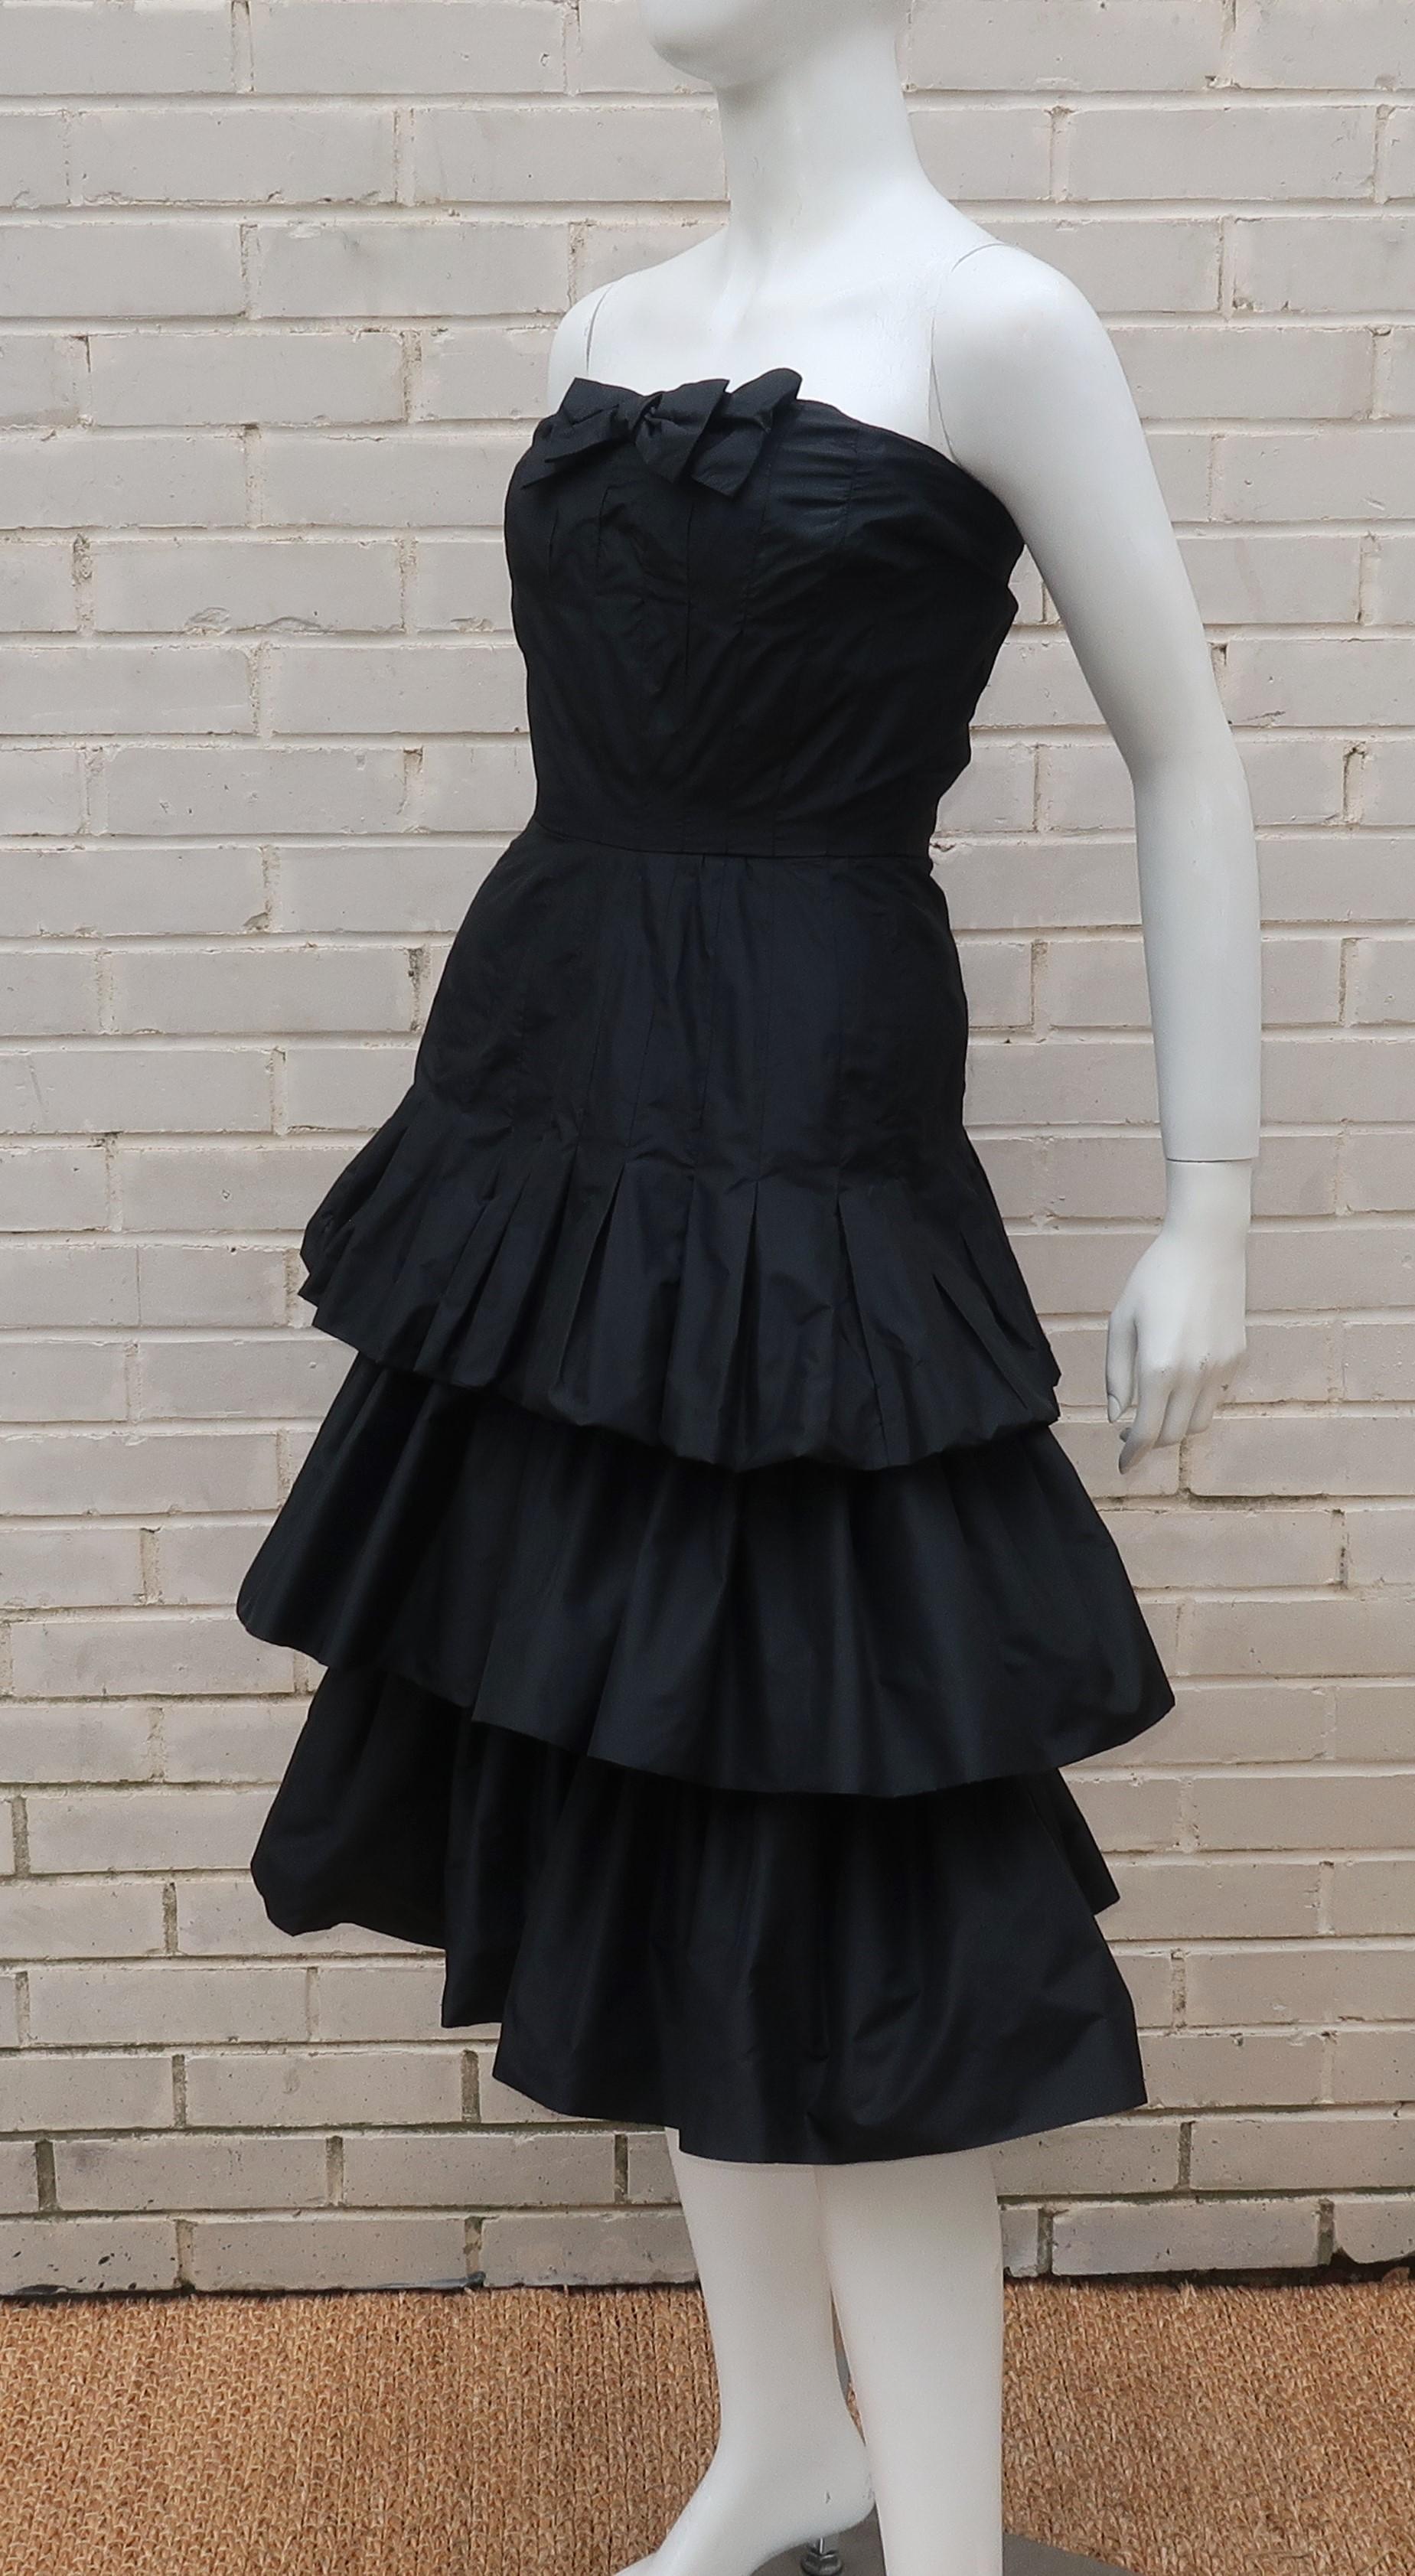 The English designer, Murray Arbeid, was known for his evening wear and often dressed Princess Diana for high profile events.  This silk taffeta strapless black dress has a decidedly youthful look with a bow at the bodice and three layers of ruffled